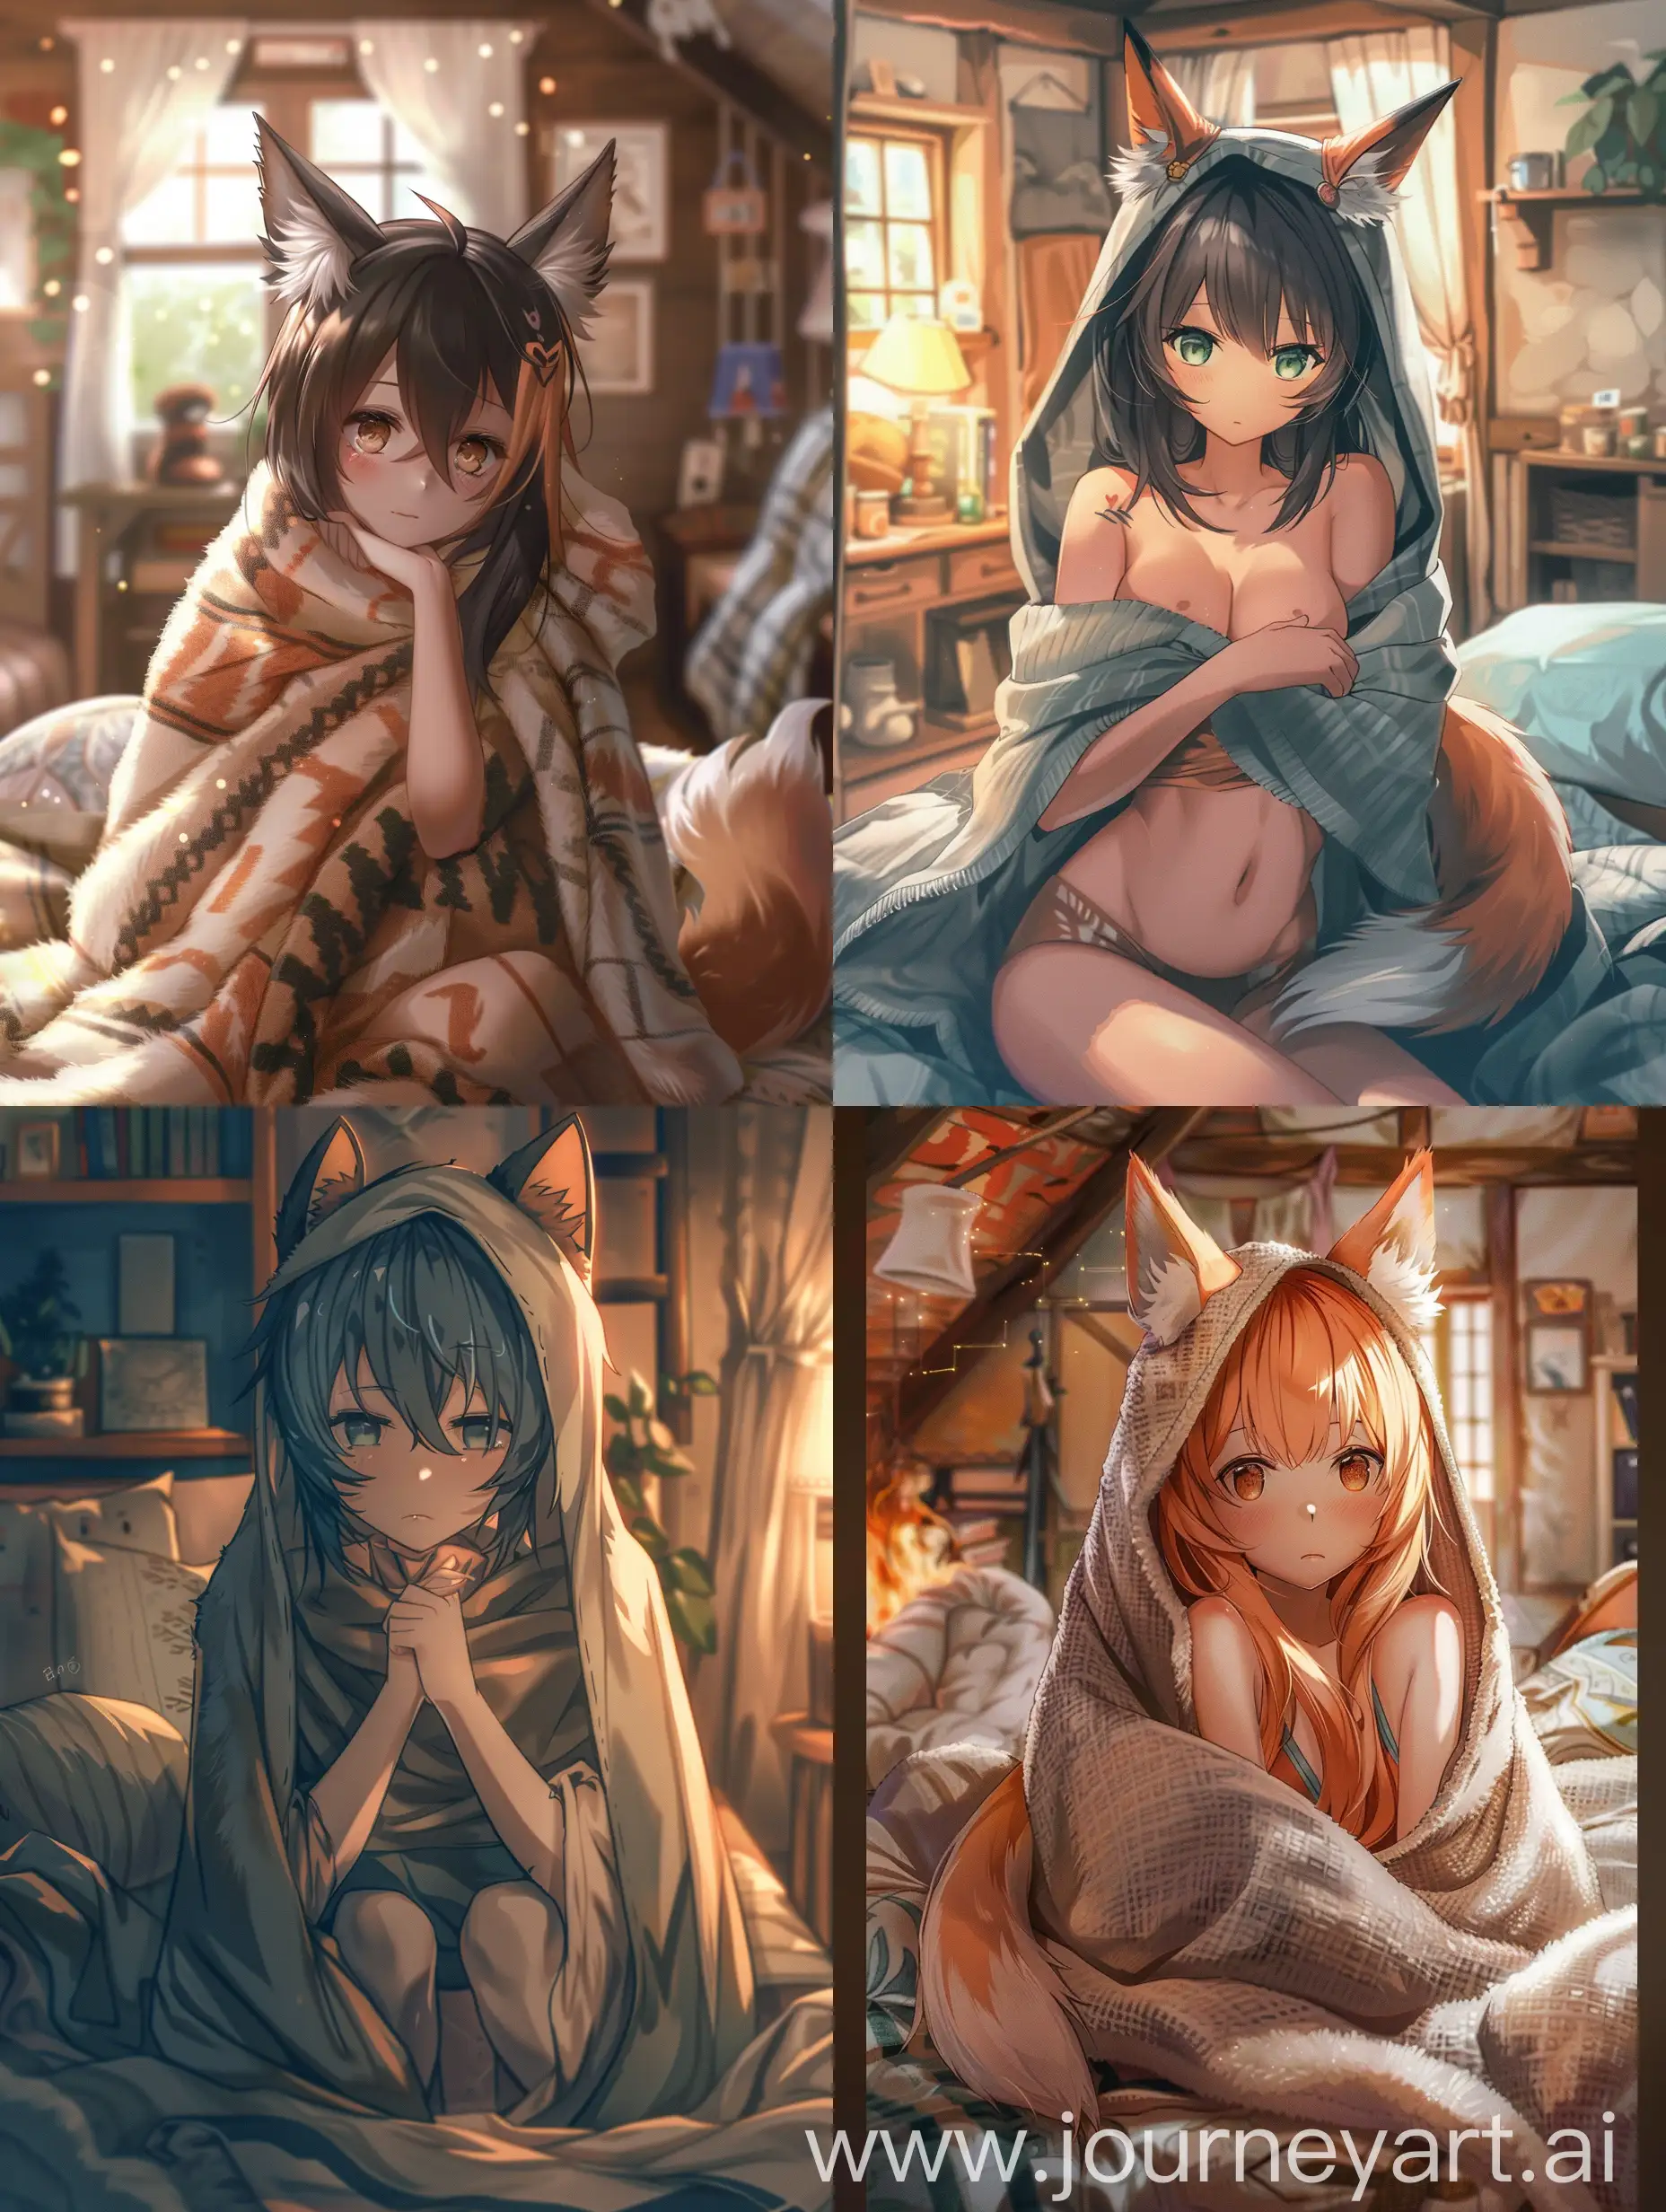 Anime femboy with fox ears and a tail wrapped up in a blanket in a cozy looking room